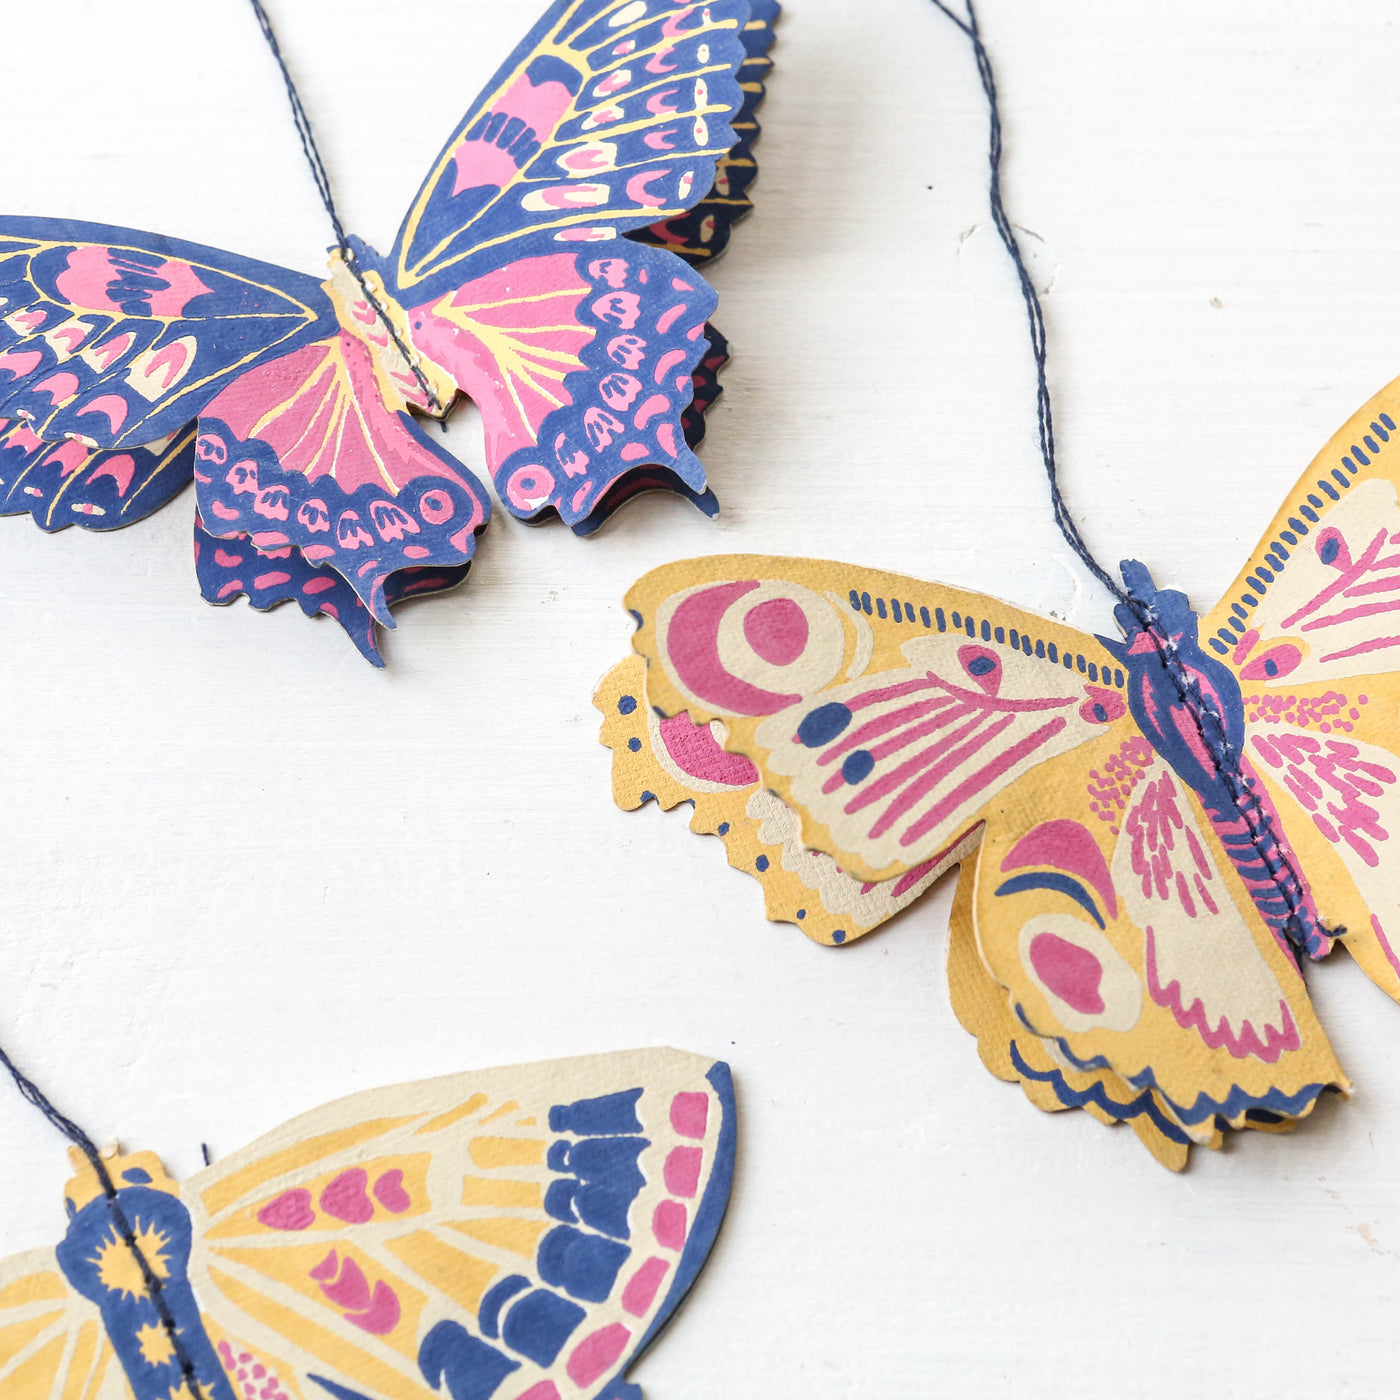 Butterfly Paper Decorations